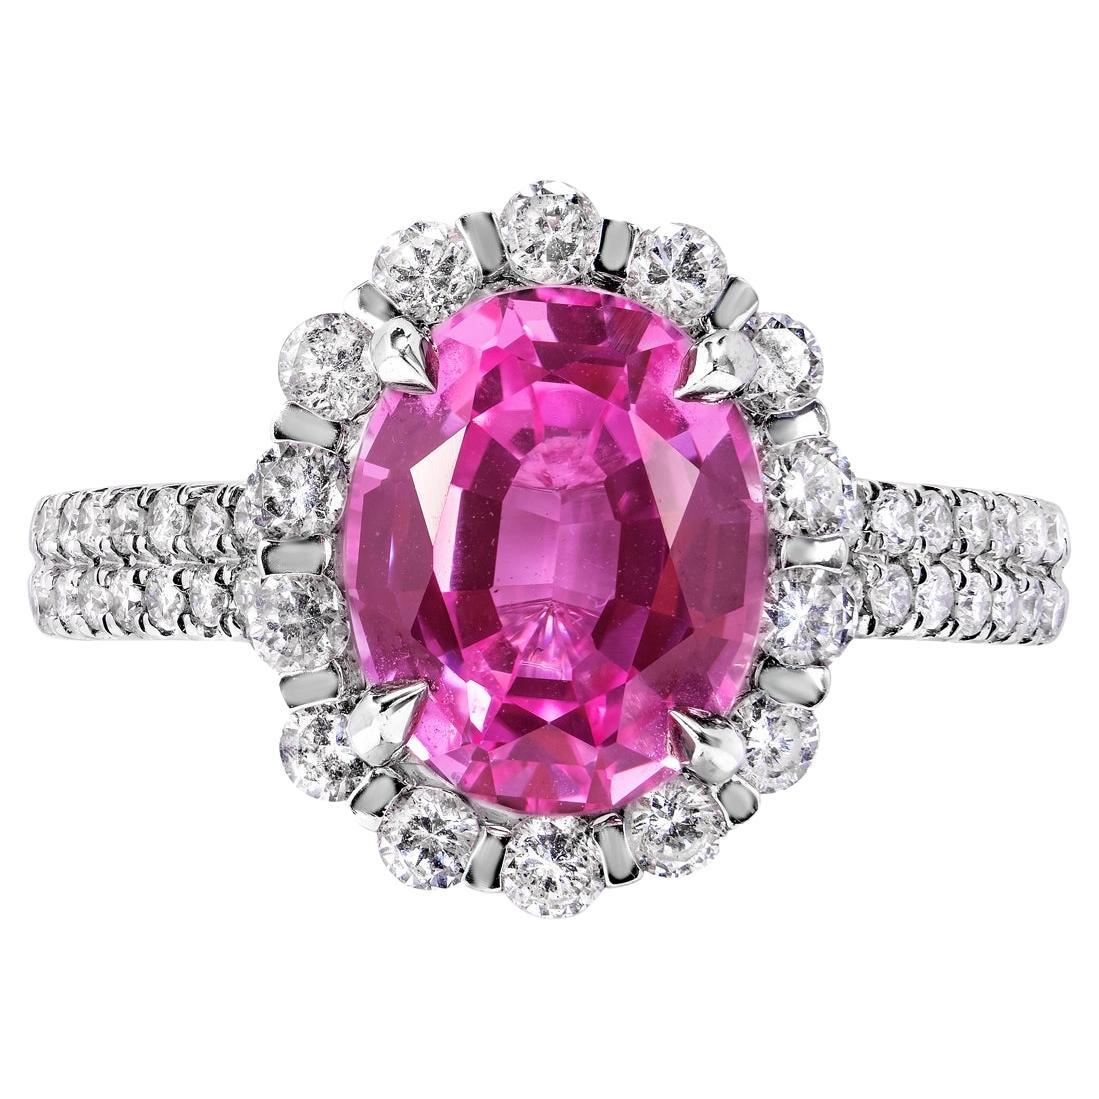 5 Carat Oval Cut Sapphire Ring Certified Pink For Sale